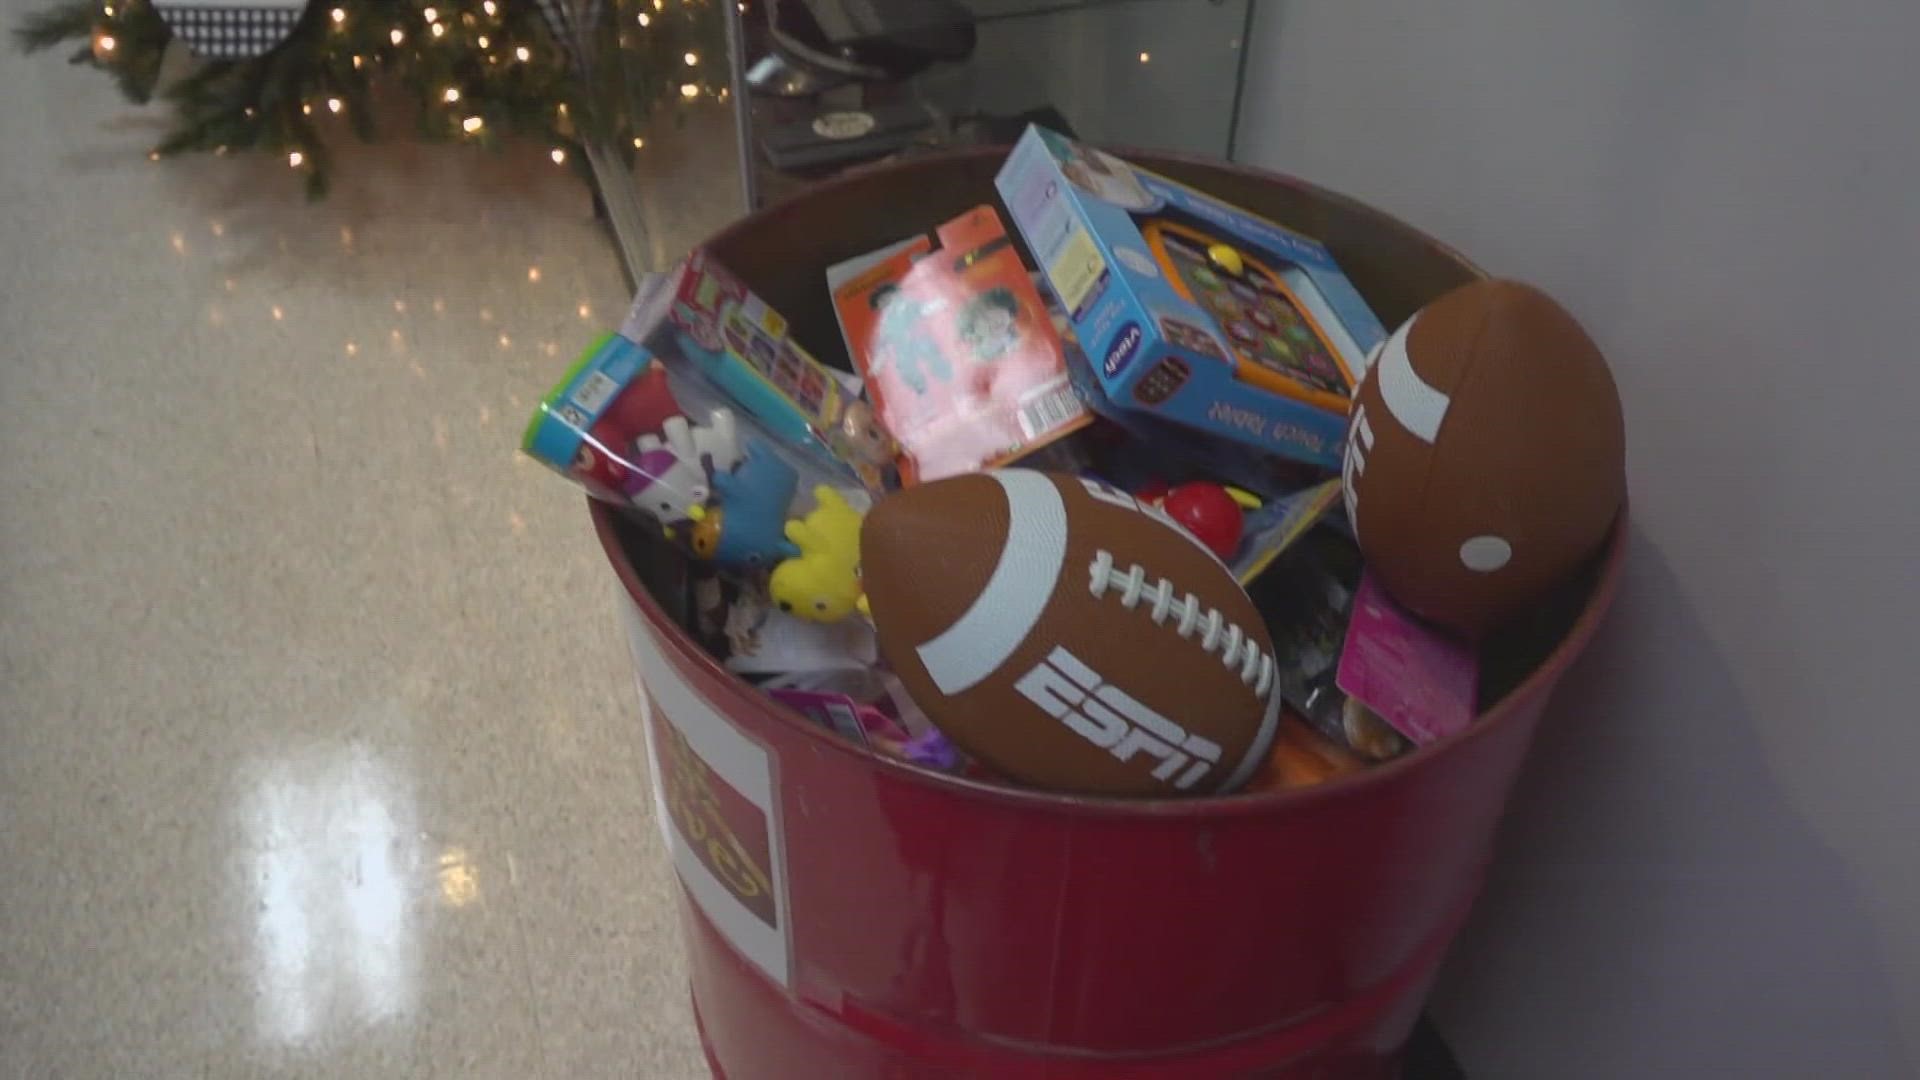 The local football team The Warbirds donated two barrels full of toys after the Odessa Police Department asked for donations.